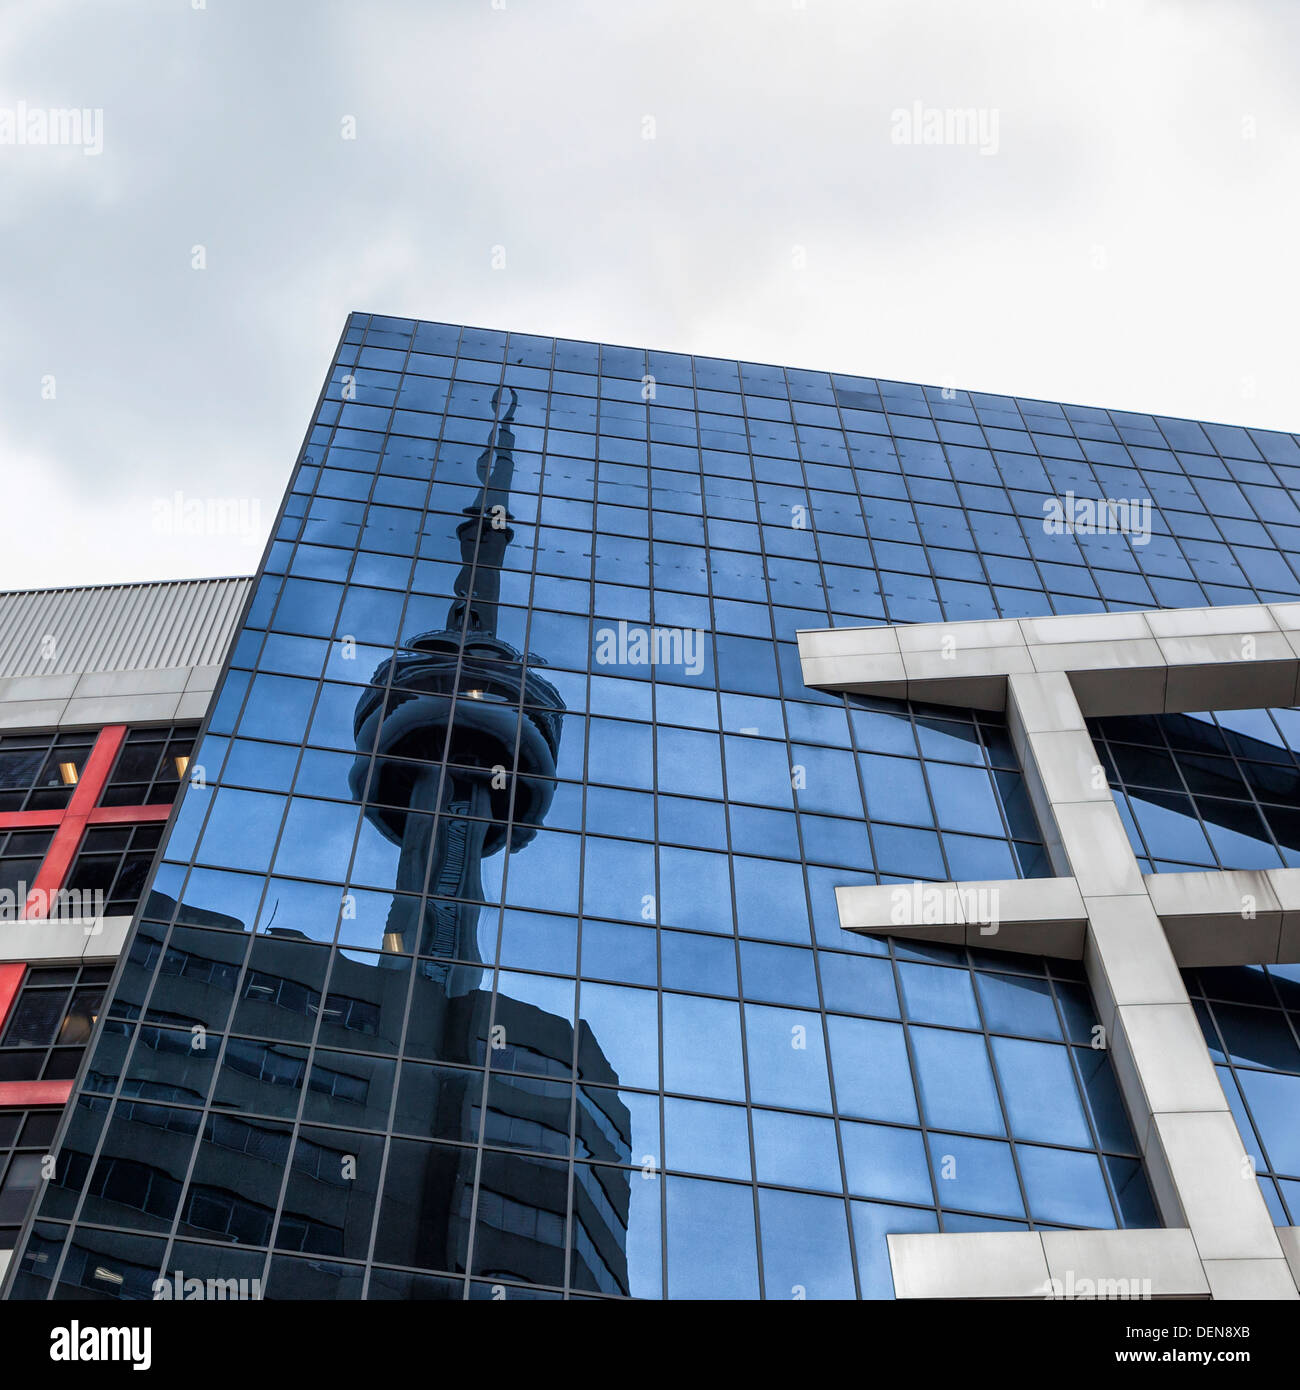 Reflection of the CN tower, the tallest structure in Toronto, in the glass windows of a tall building Stock Photo